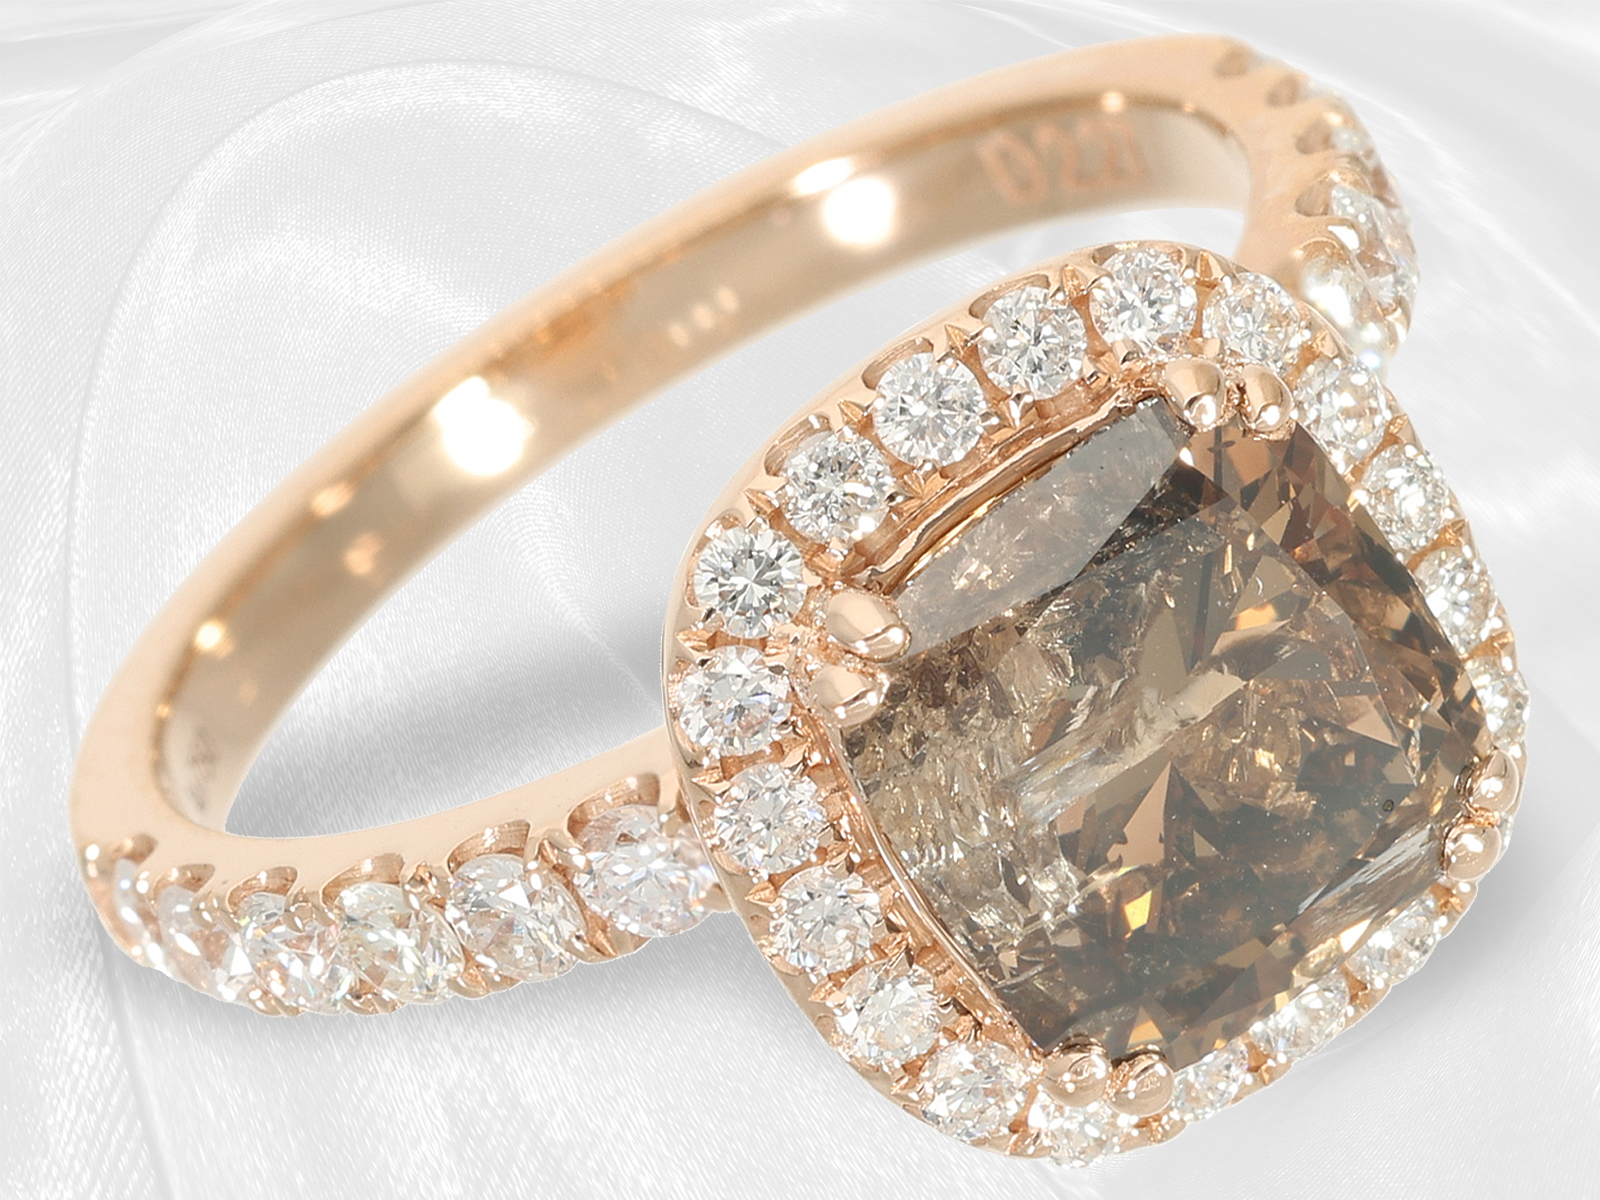 Interesting high carat pink gold ring with white and a fancy brilliant-cut diamond of 2.28ct, unworn - Image 5 of 7